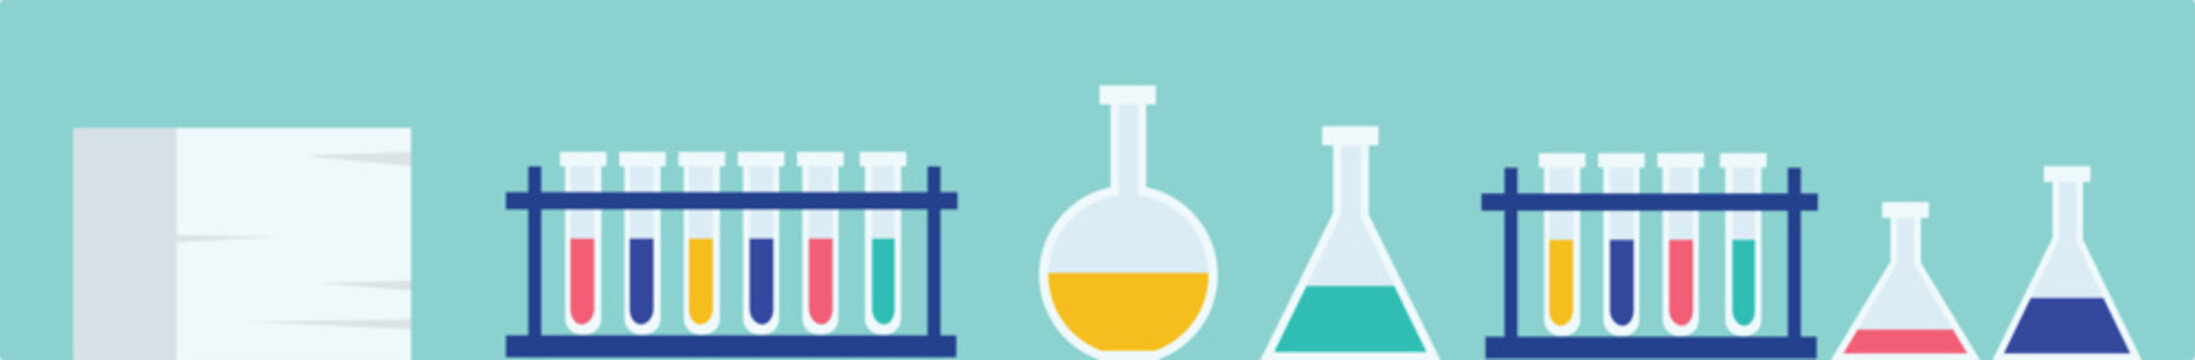 Laboratory equipment flat design illustration. Science experiment with test tubes, beakers, and flasks. Chemical, research graphic colorful, liquids